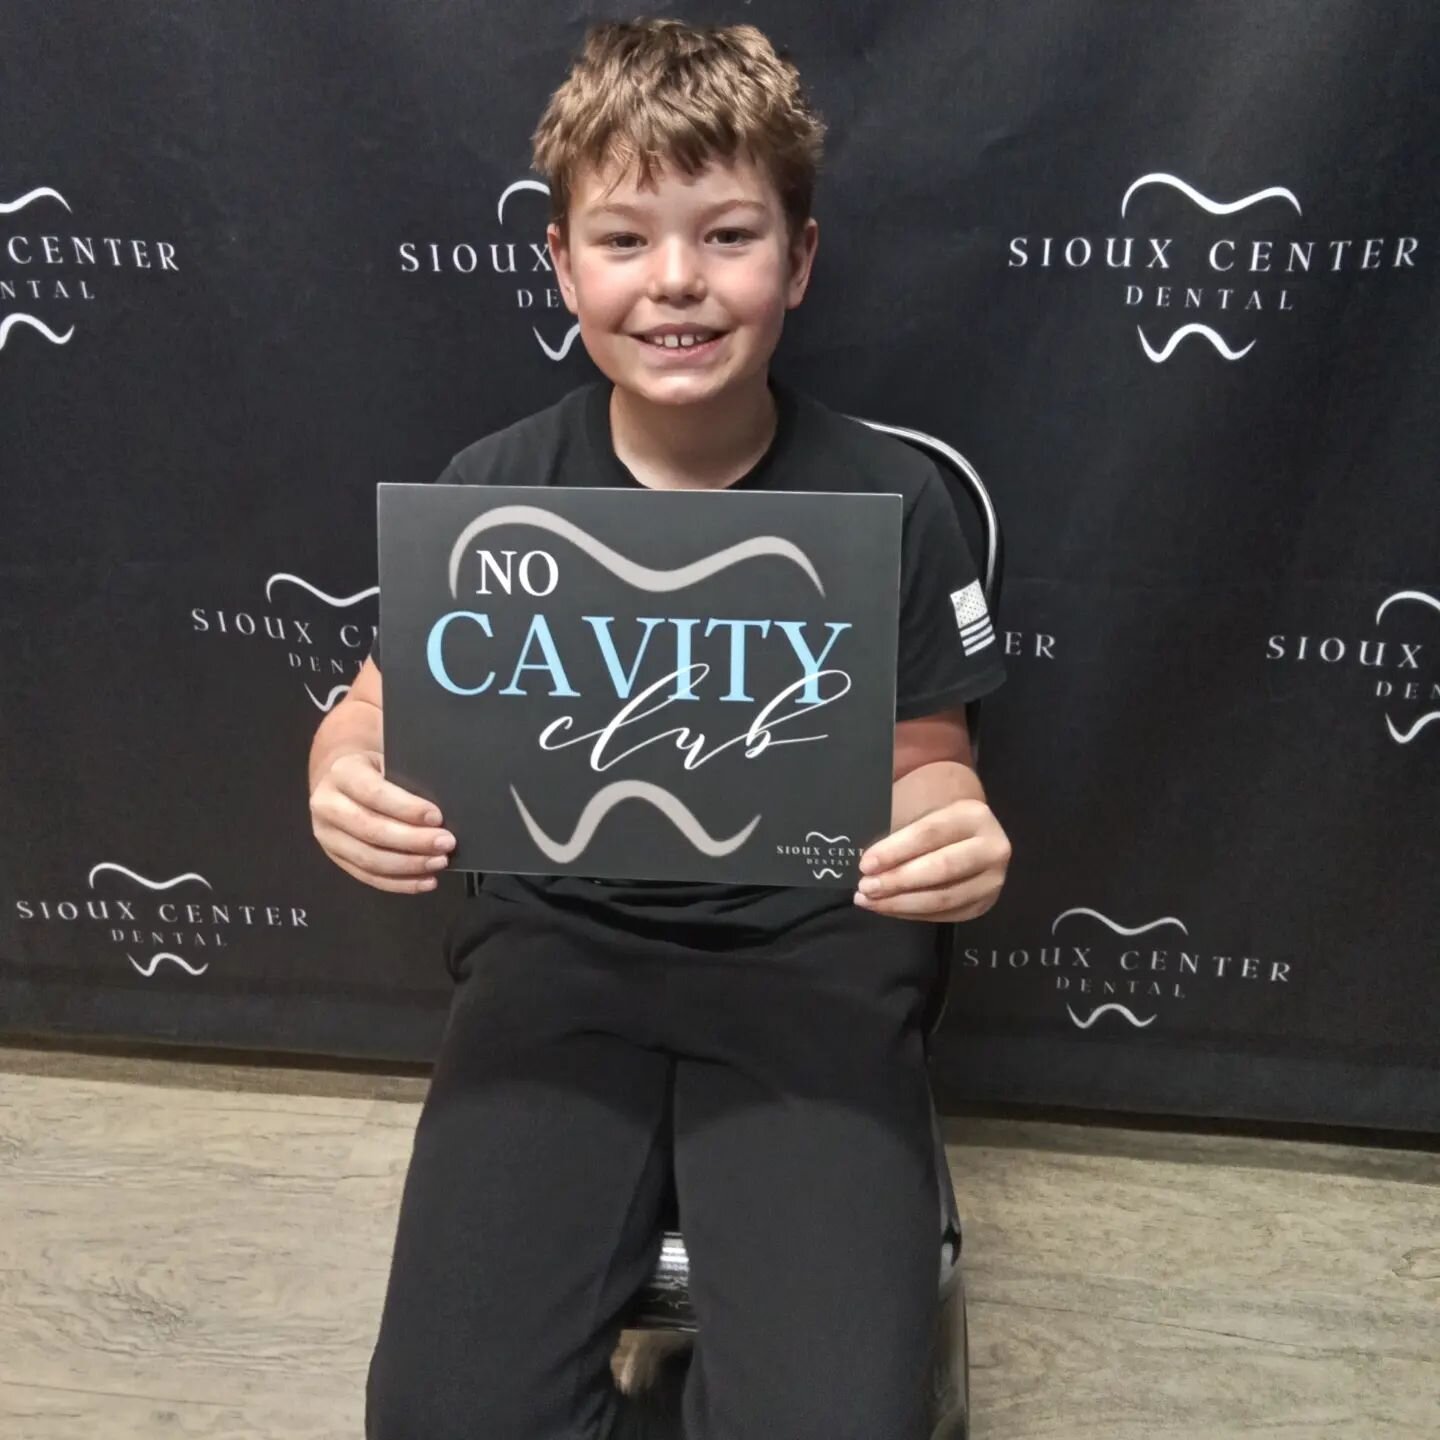 Here's our recent ✨️No Cavity Club✨️ kids! Congrats to Mason, Jayden, and Spencer on having great checkups! Keep up the great brushing, everyone! 🦷🪥😁
.
.
.
#siouxcenterdental 
#faithfamilyservice 
#generaldentist 
#nocavityclub 
#siouxcenterdental